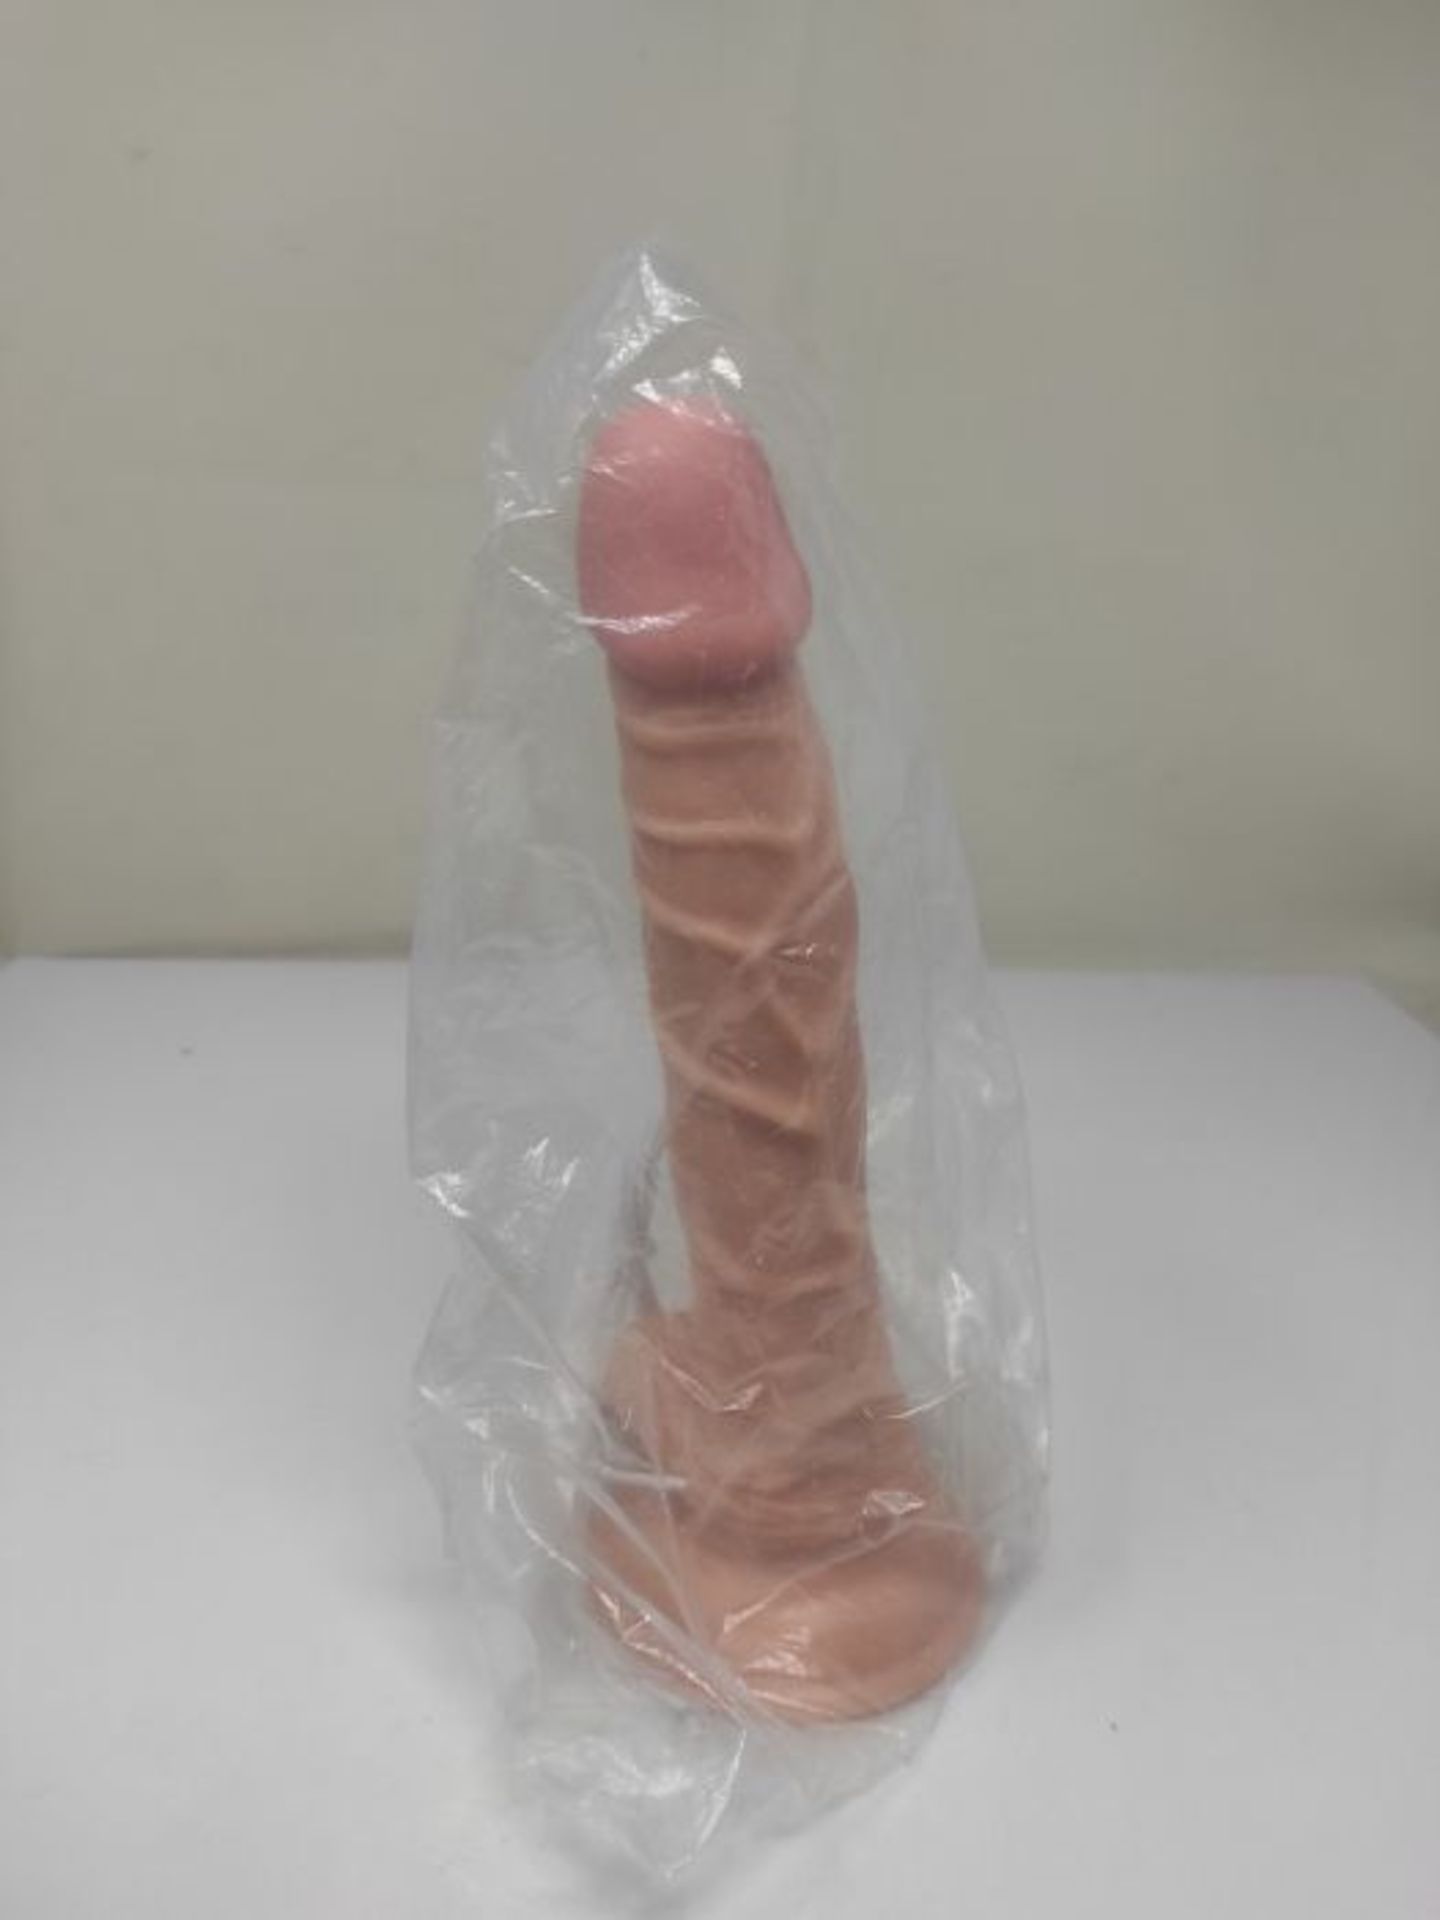 Dildo Compact Soft Item for Relaxation with Suction Cup Easy to Clean - Image 2 of 2